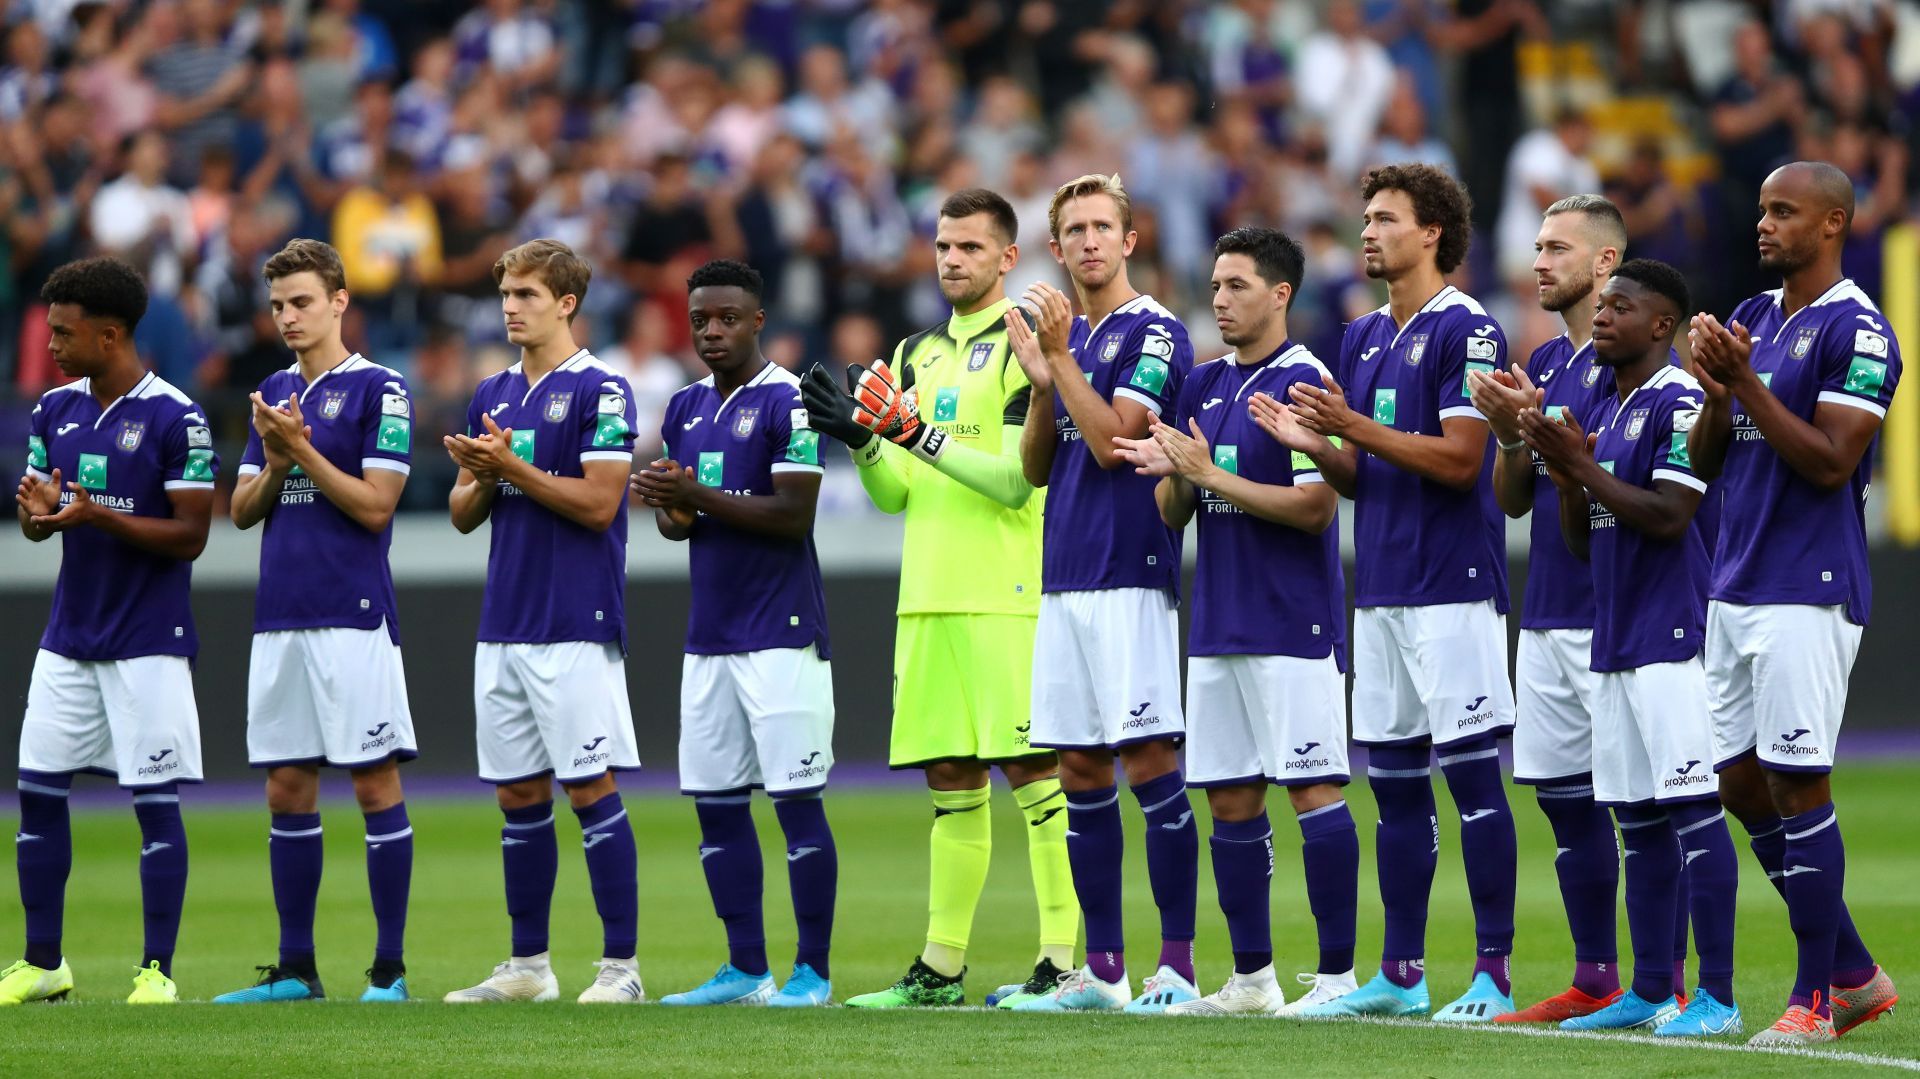 Anderlecht will be looking to win the game